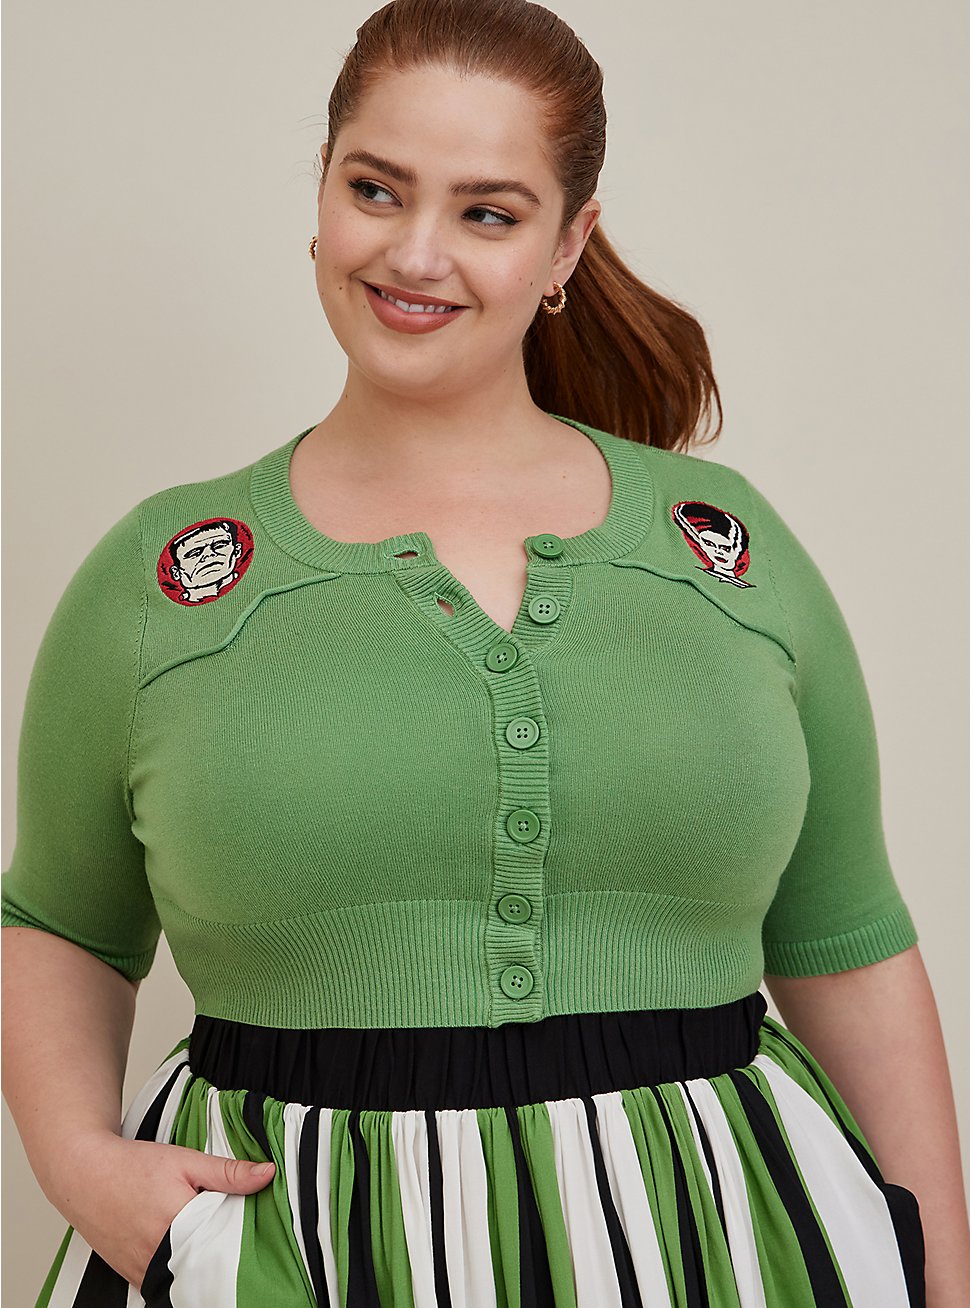 Plus Size Universal Monsters The Bride Of Frankenstein Button Up Shrug, STONE GREEN, hi-res